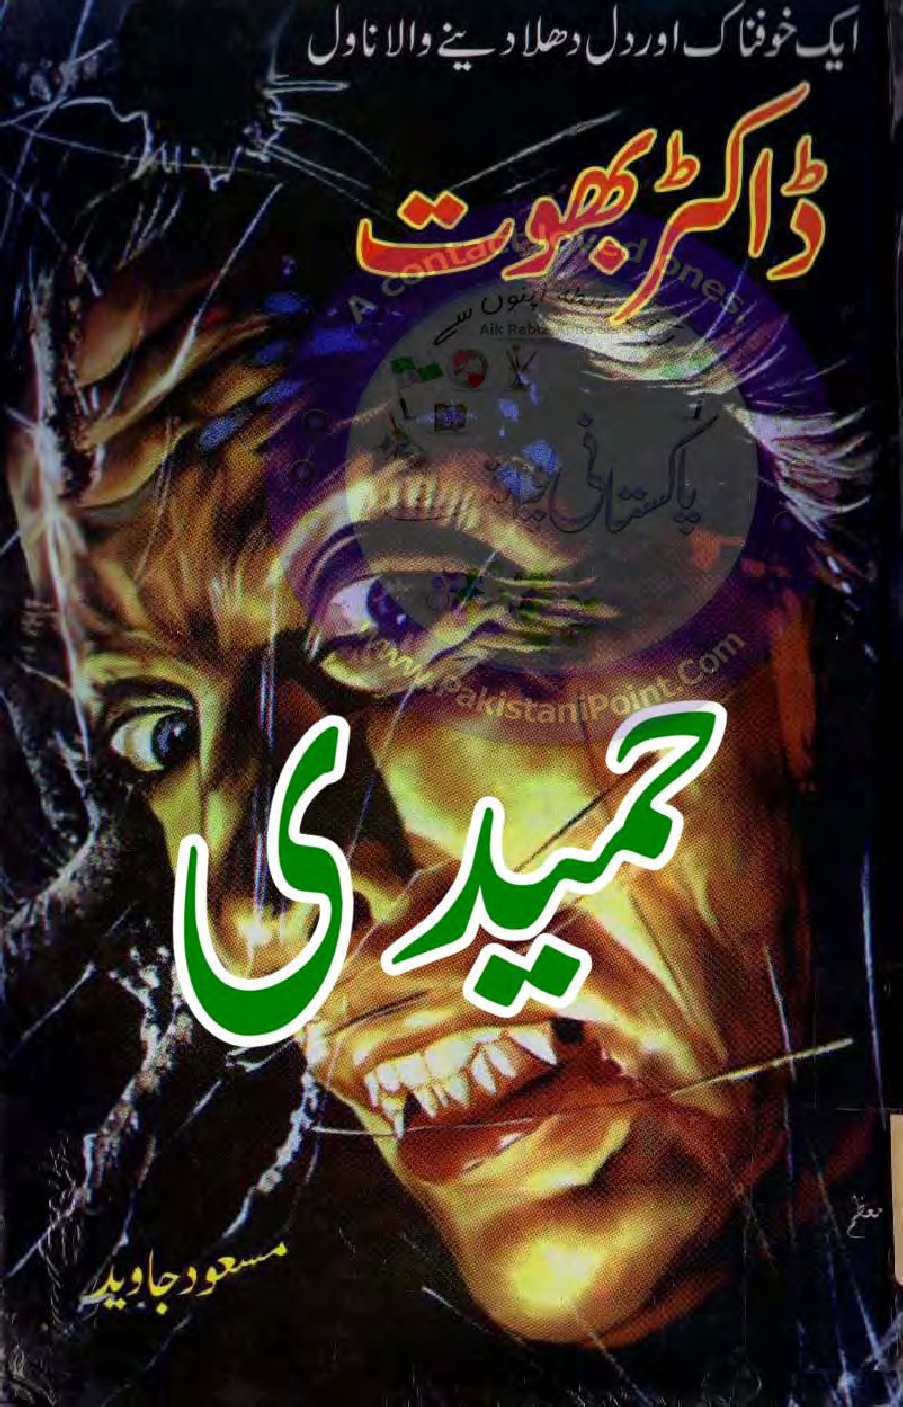 Dr Bhoot by Masood Javed download pdf